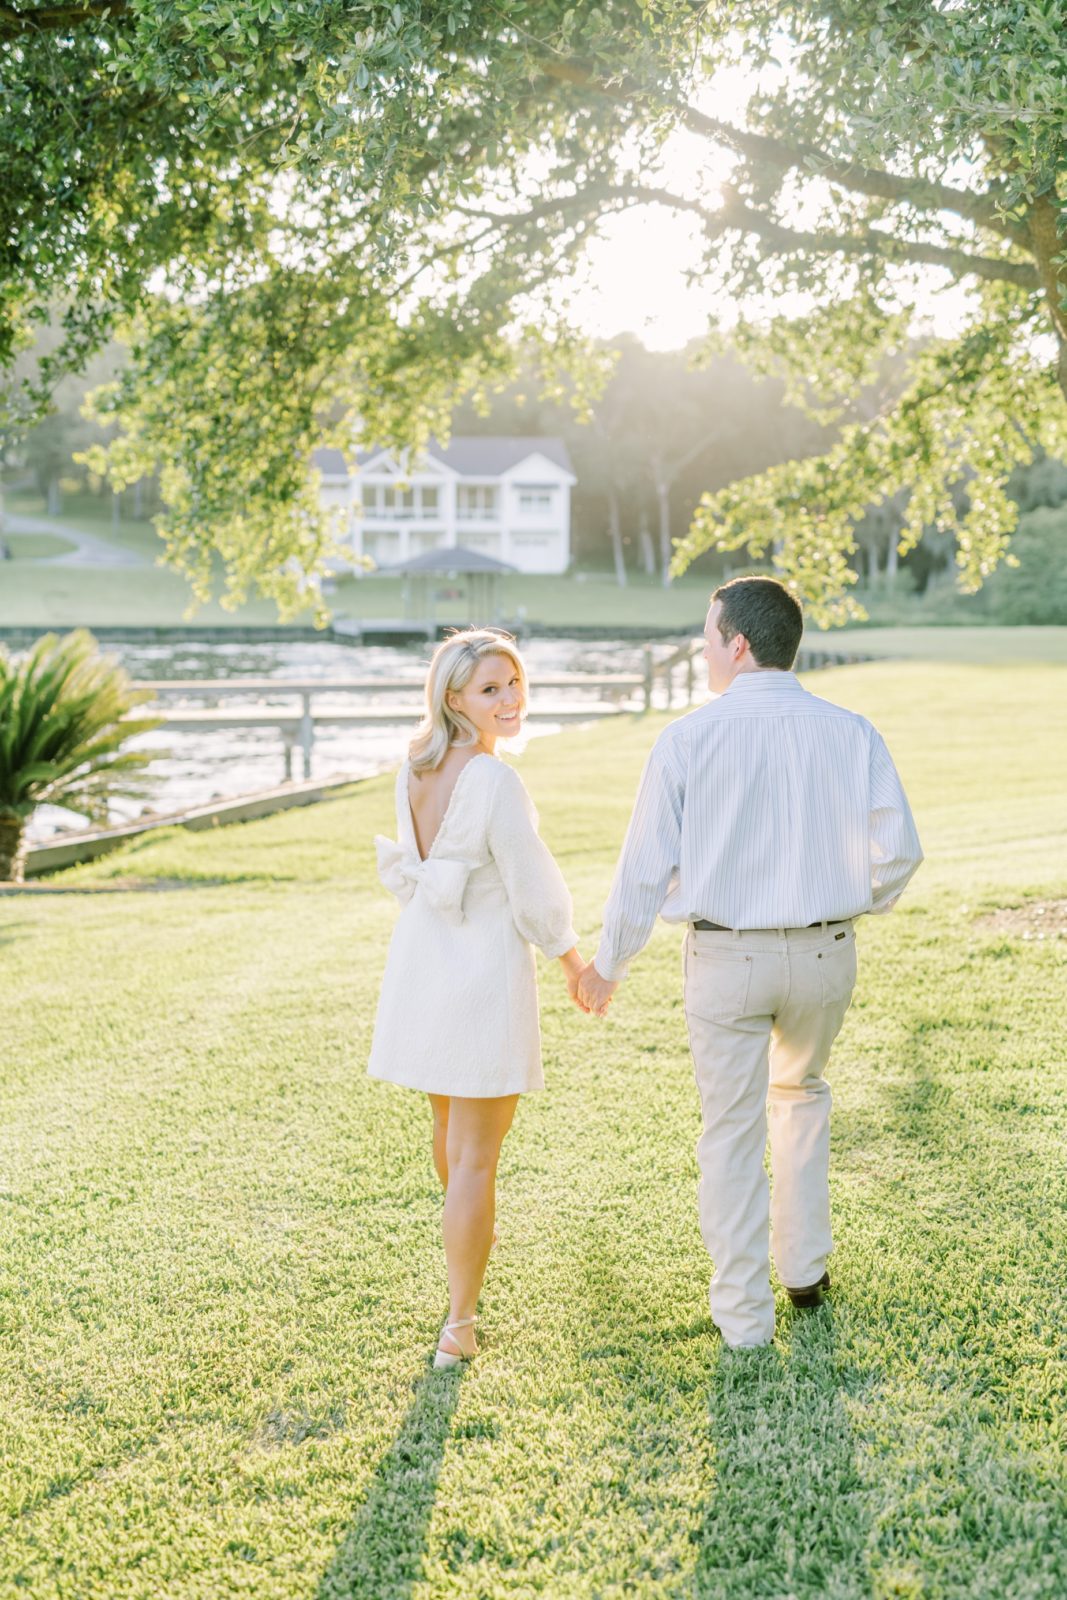 With the sun setting behind them, boyfriend and girlfriend walk hand in hand under a green tree by Christina Elliott Photography. romantic #ChristinaElliottPhotography #ChristinaElliottEngagements #LakeLivingston #summerengagements #Texasphotographer